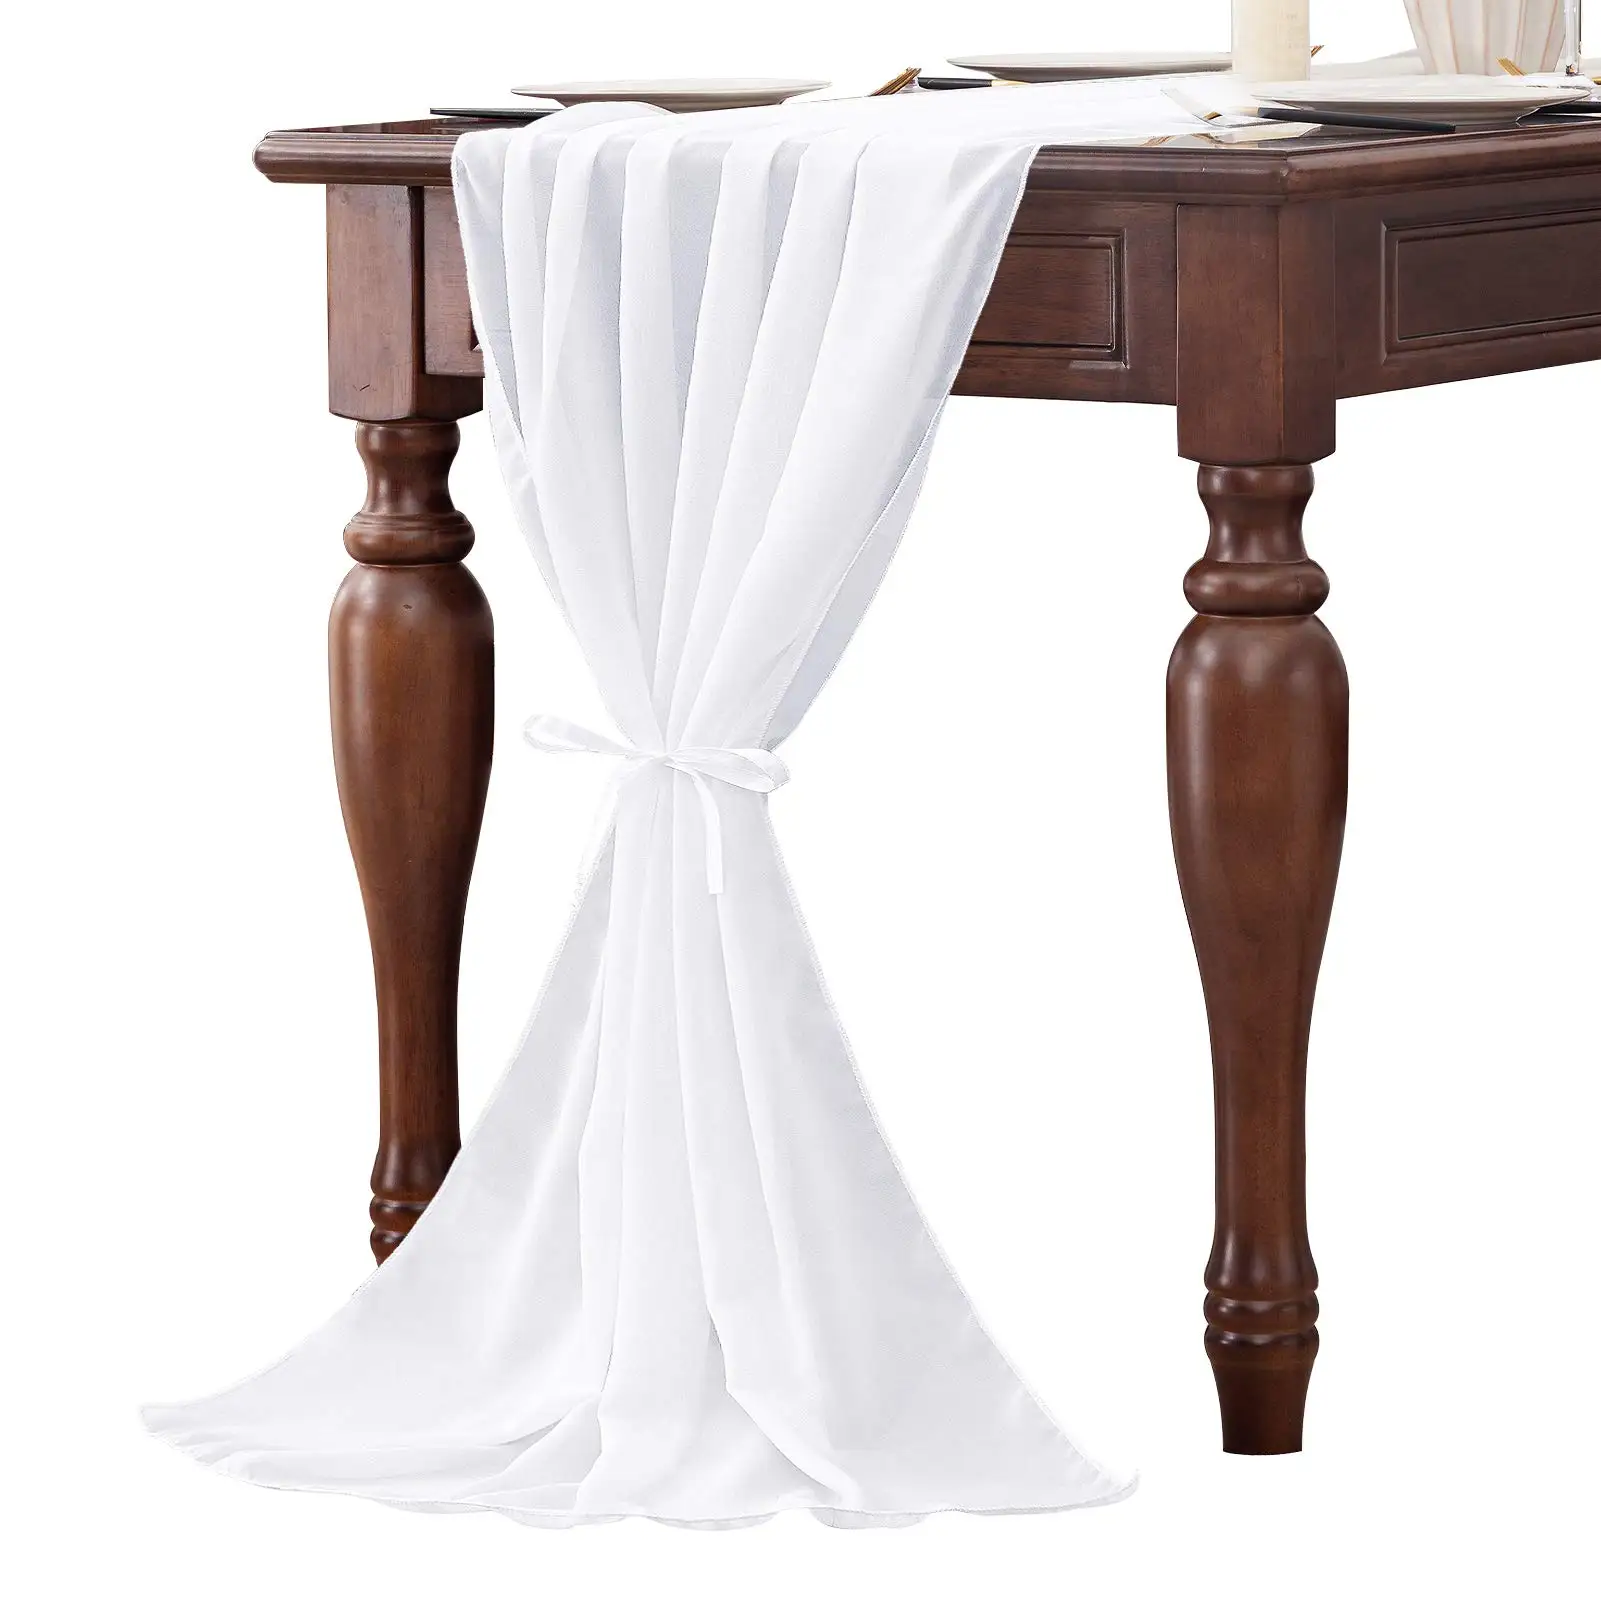 

White Chiffon Table Runner 30X300cm Romantic Wedding Table Runners for Dinding Sheer Bridal Baby Shower Party Table Decorations